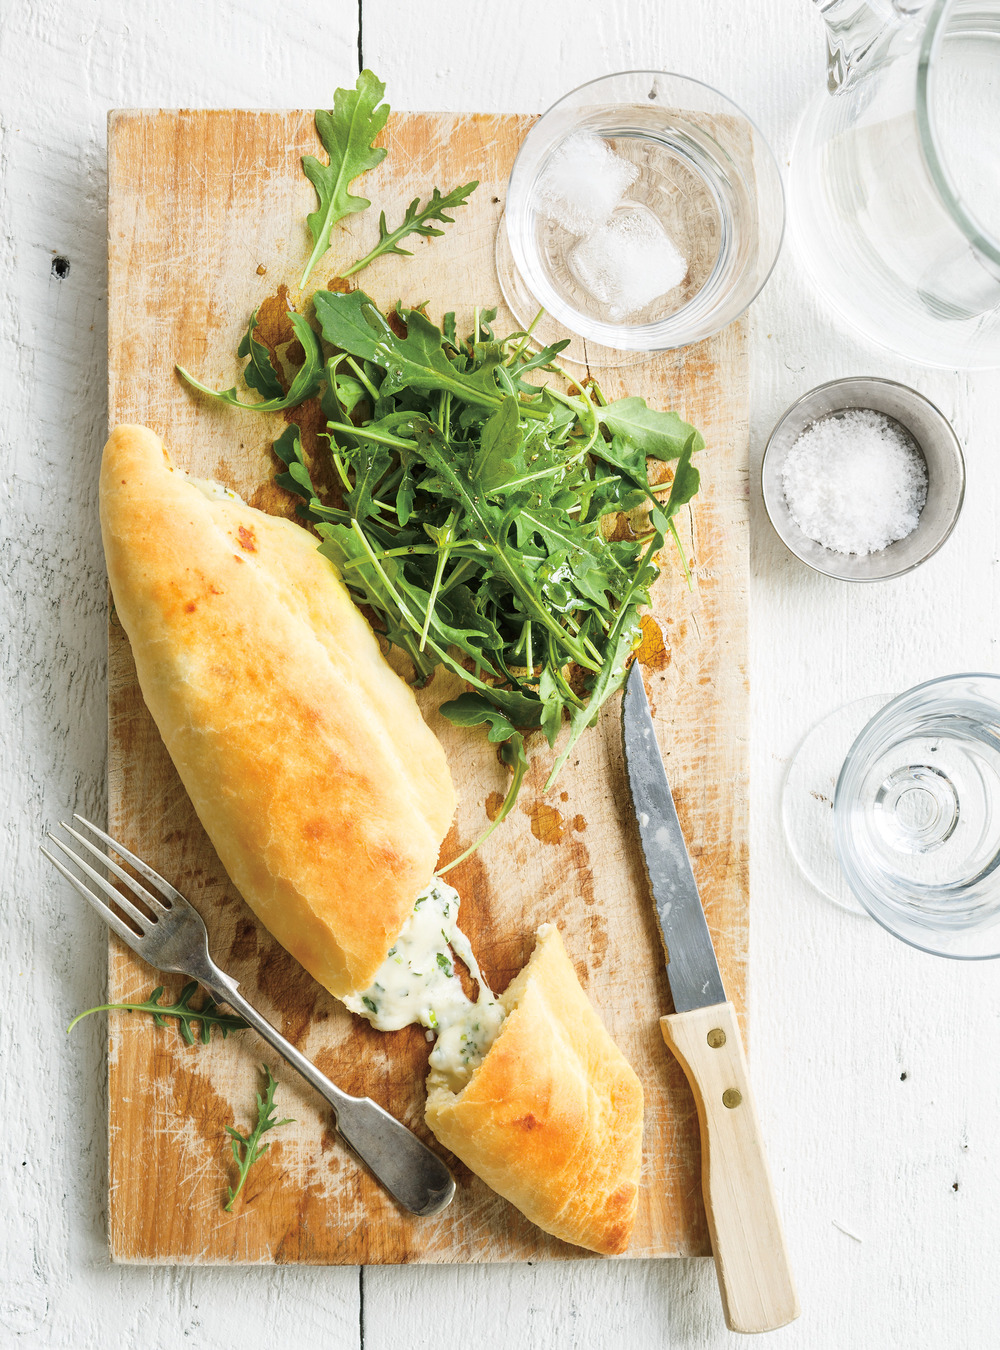 Tronchetti aux trois fromages (calzones)